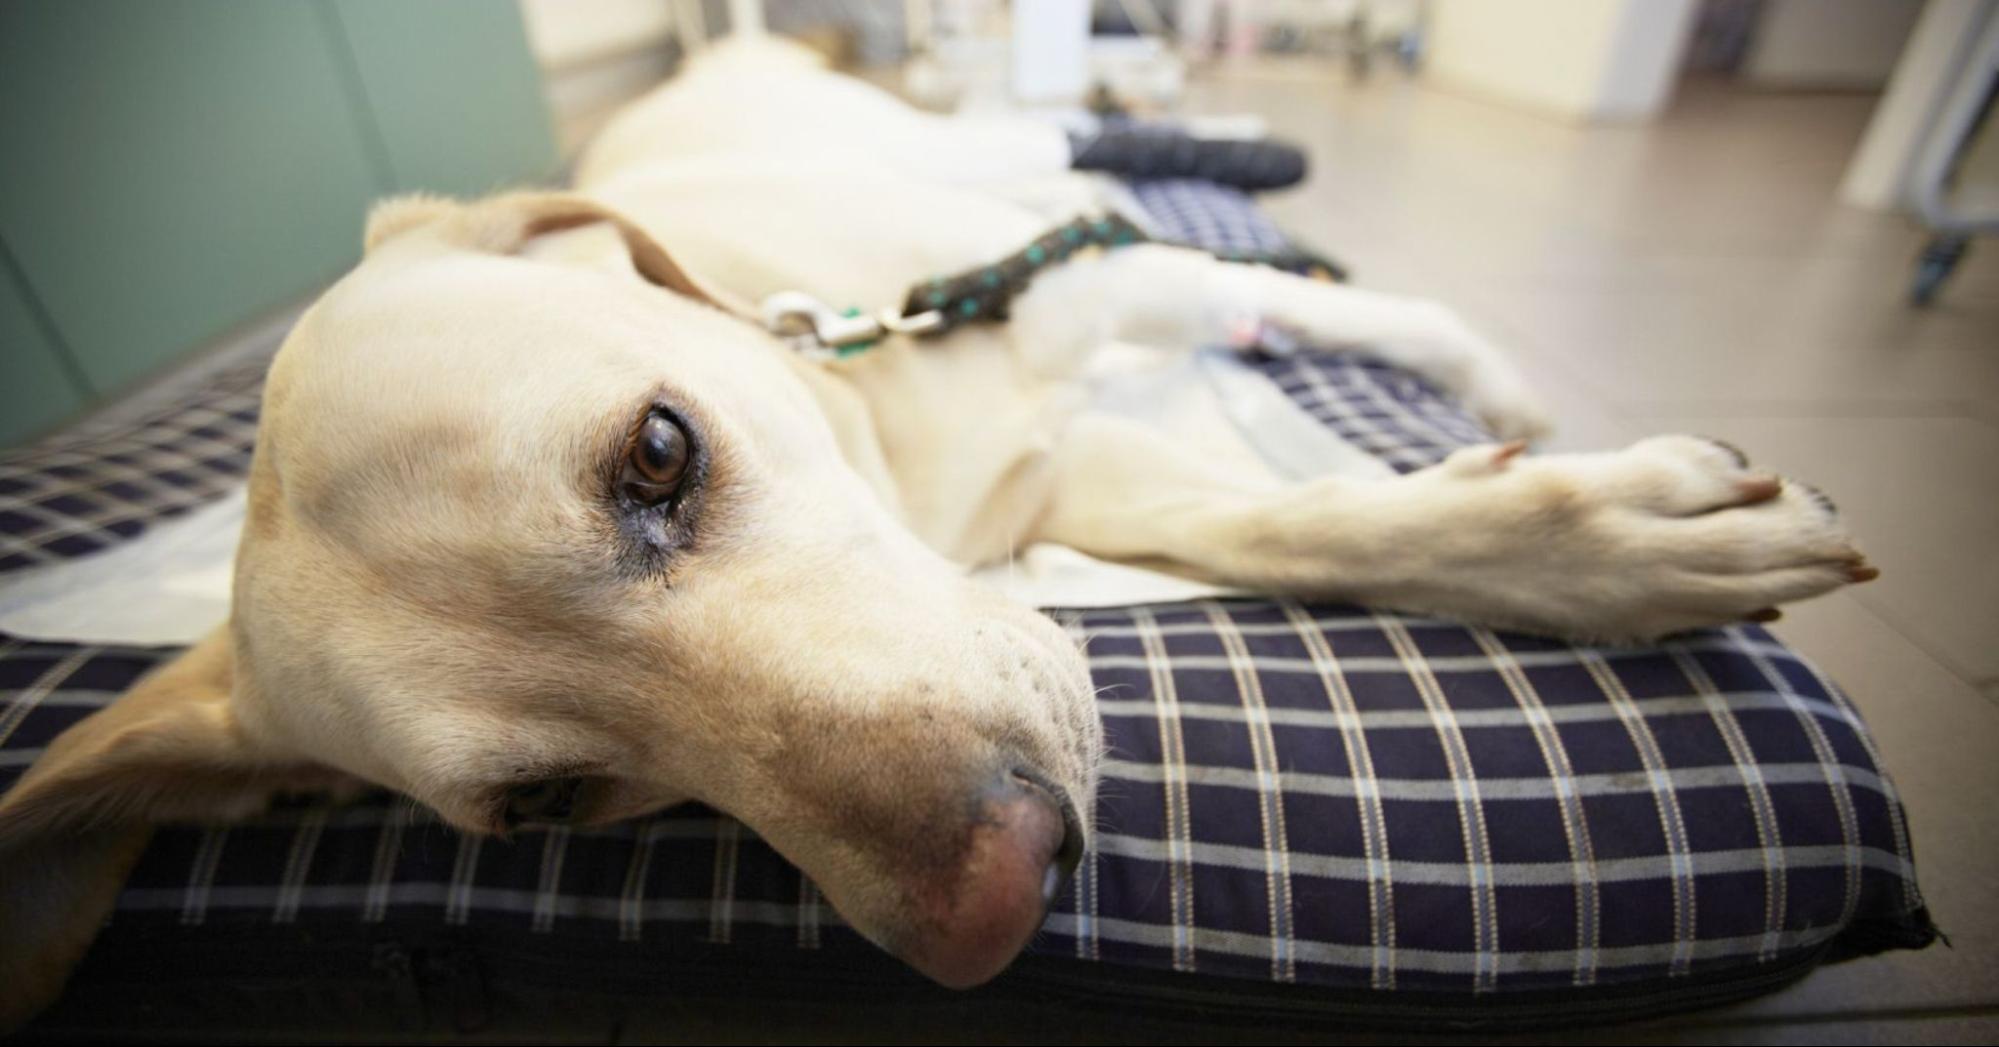 When To Humanely Euthanize A Dog With Cancer